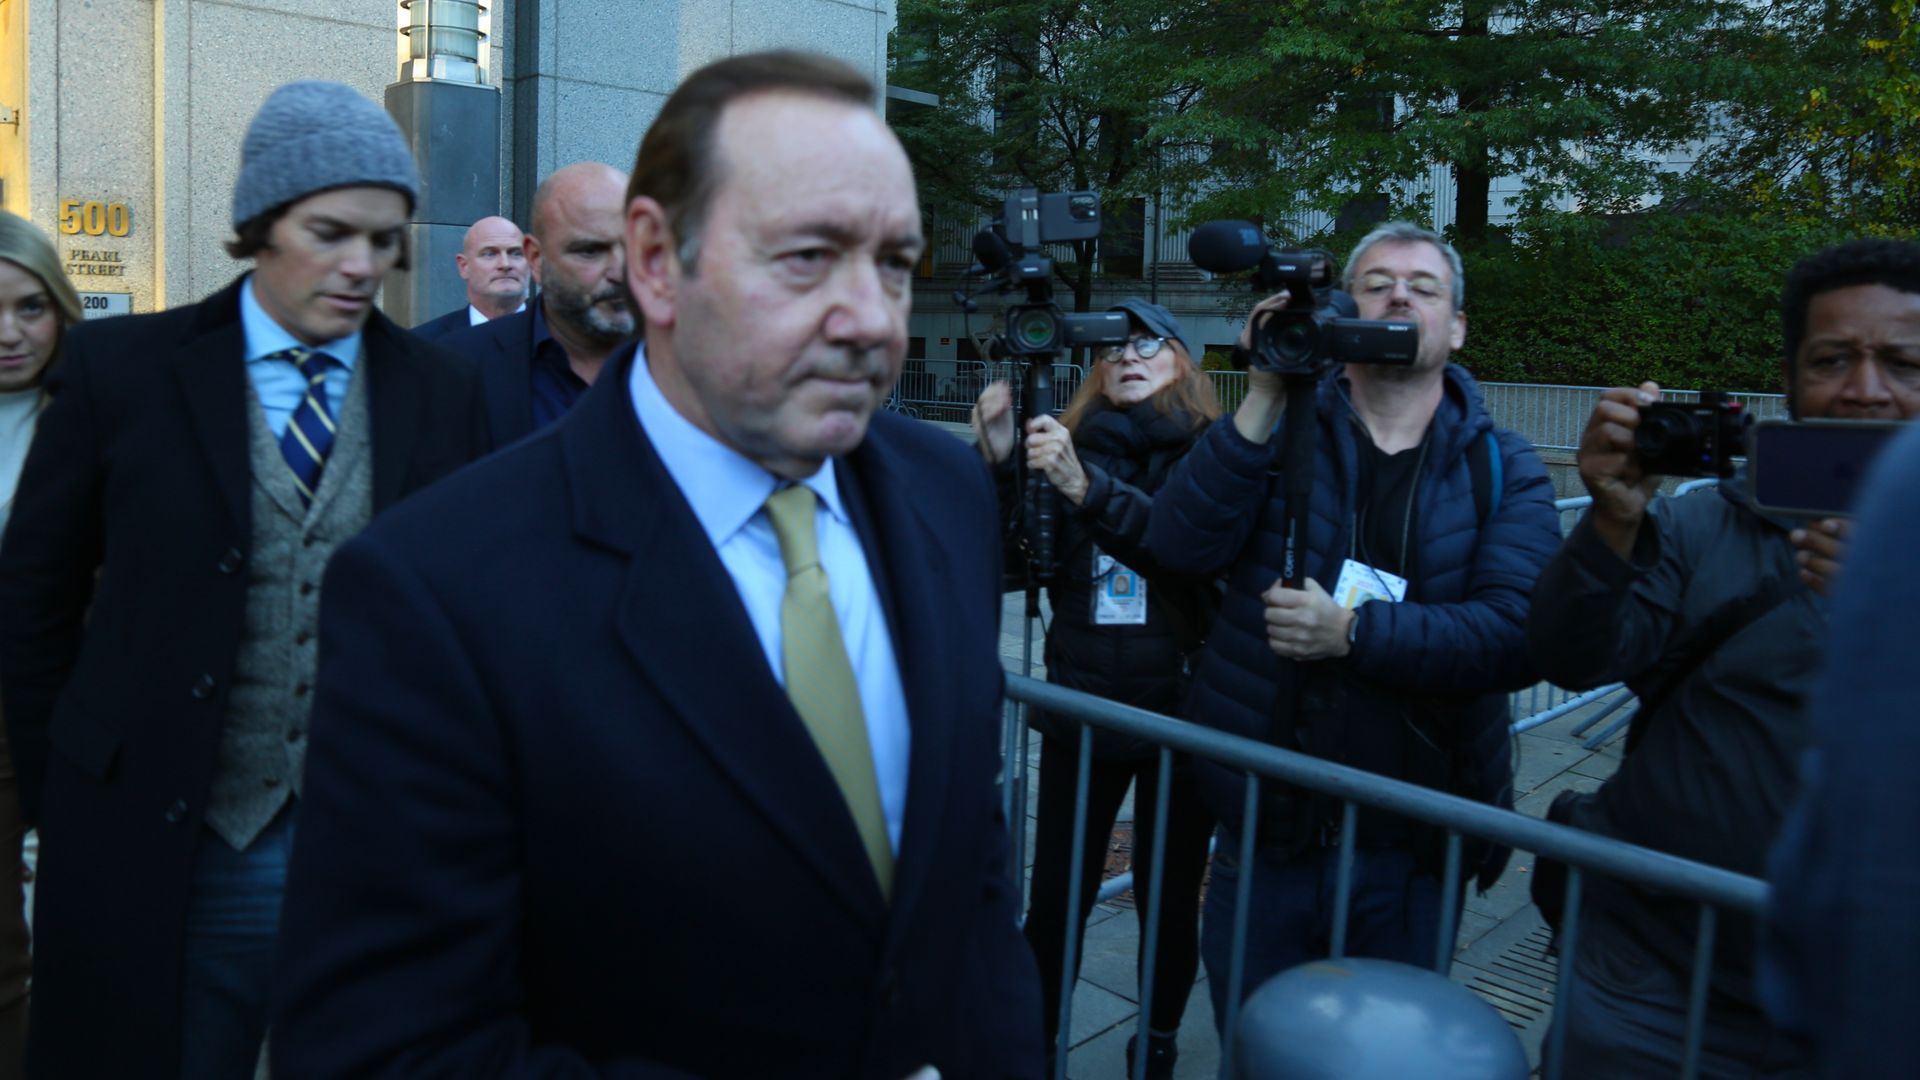 World-renowned actor Kevin Spacey leaves the Federal Court following his trial in Downtown New York, United States on October 20, 2022. 